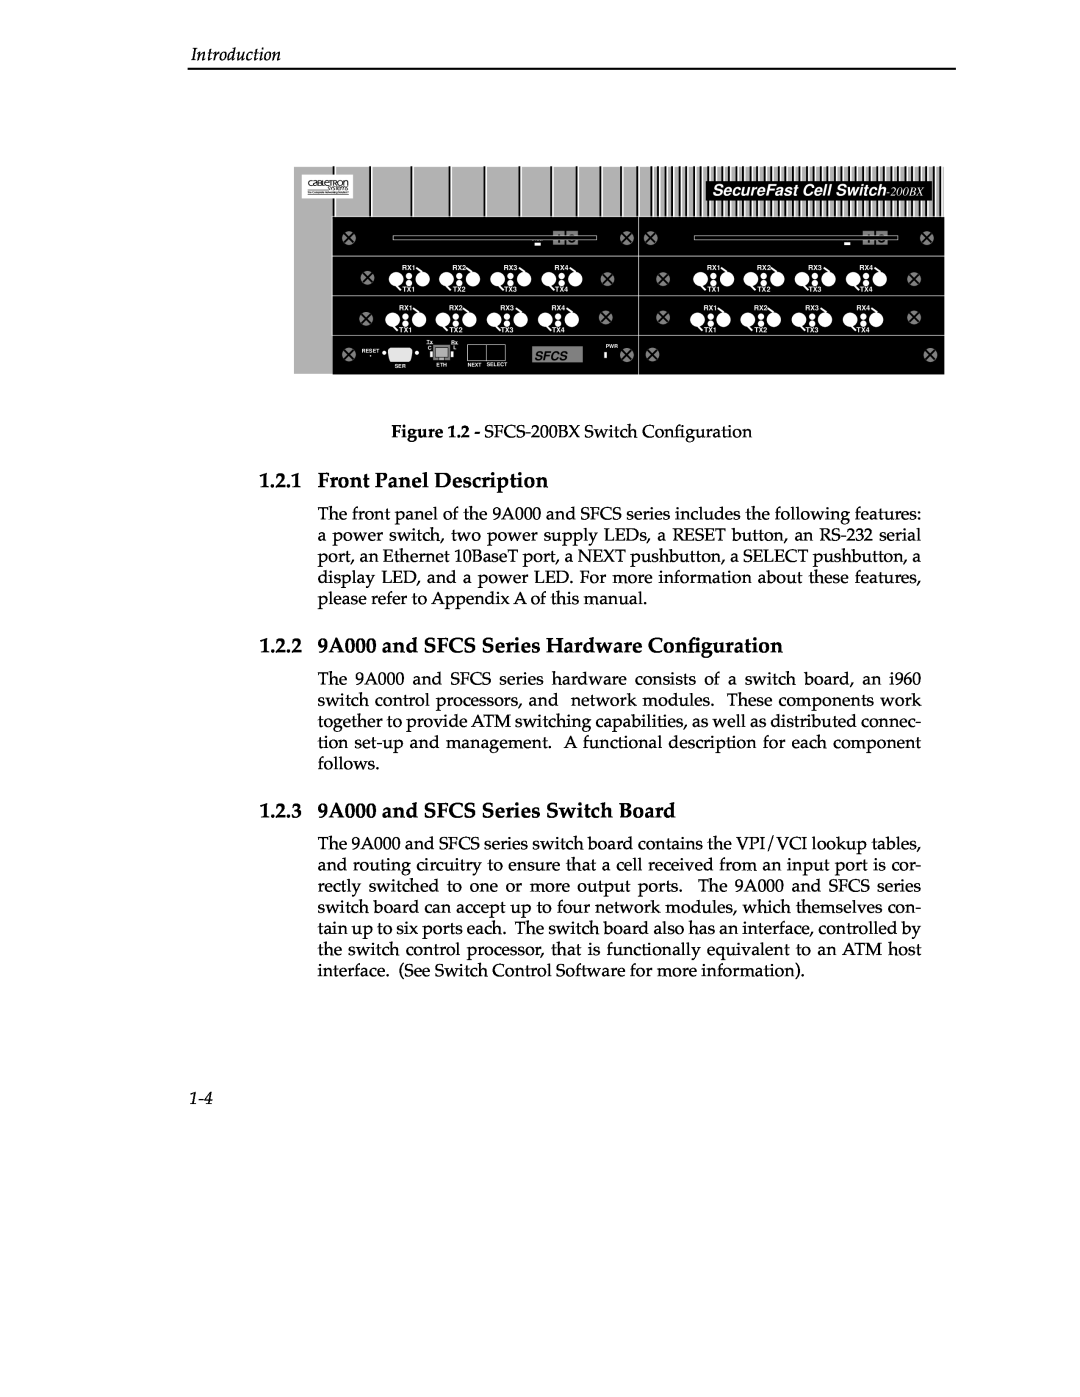 Cabletron Systems manual Front Panel Description, 1.2.2 9A000 and SFCS Series Hardware Conﬁguration, Introduction 